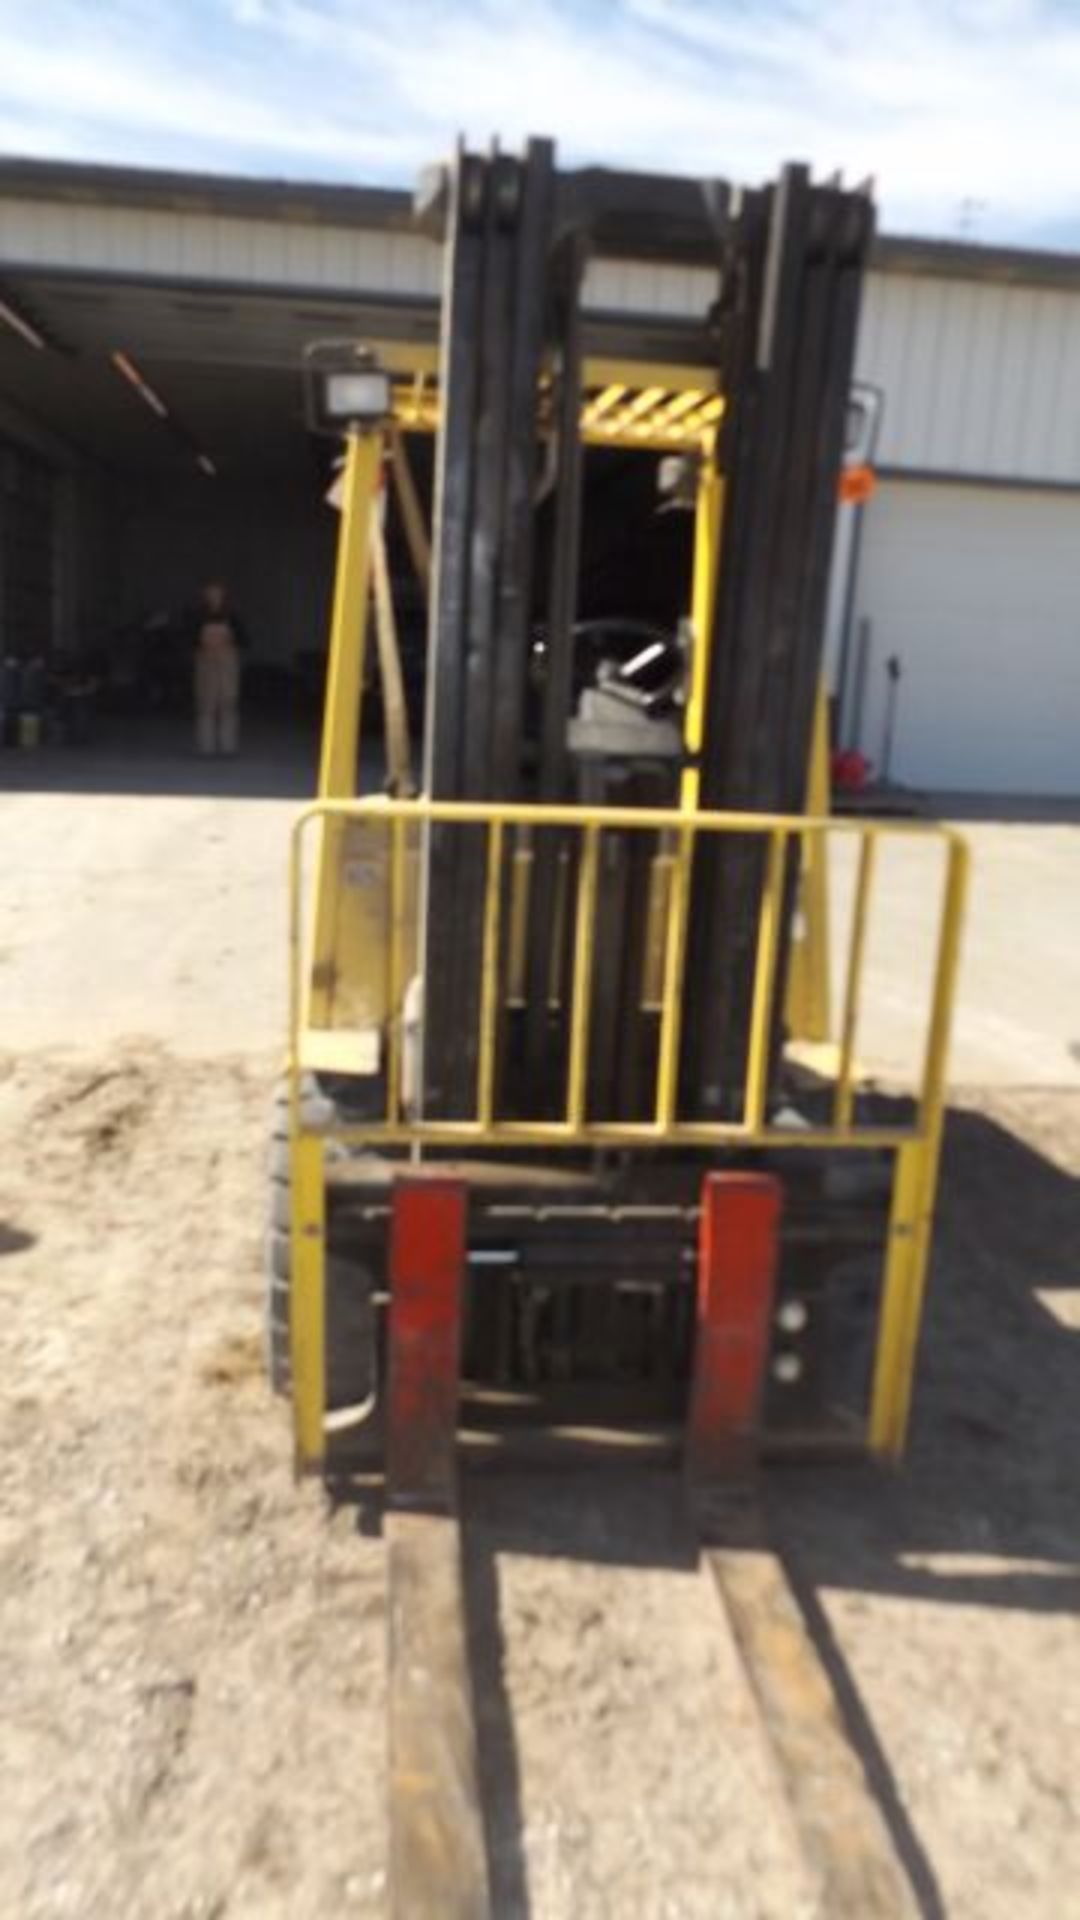 Hyster 60 Fork Lift 1029 hrs, Gas, 3 Stage Low-Profile Mast, 48" Forks, 6000# Capacity - Image 2 of 4